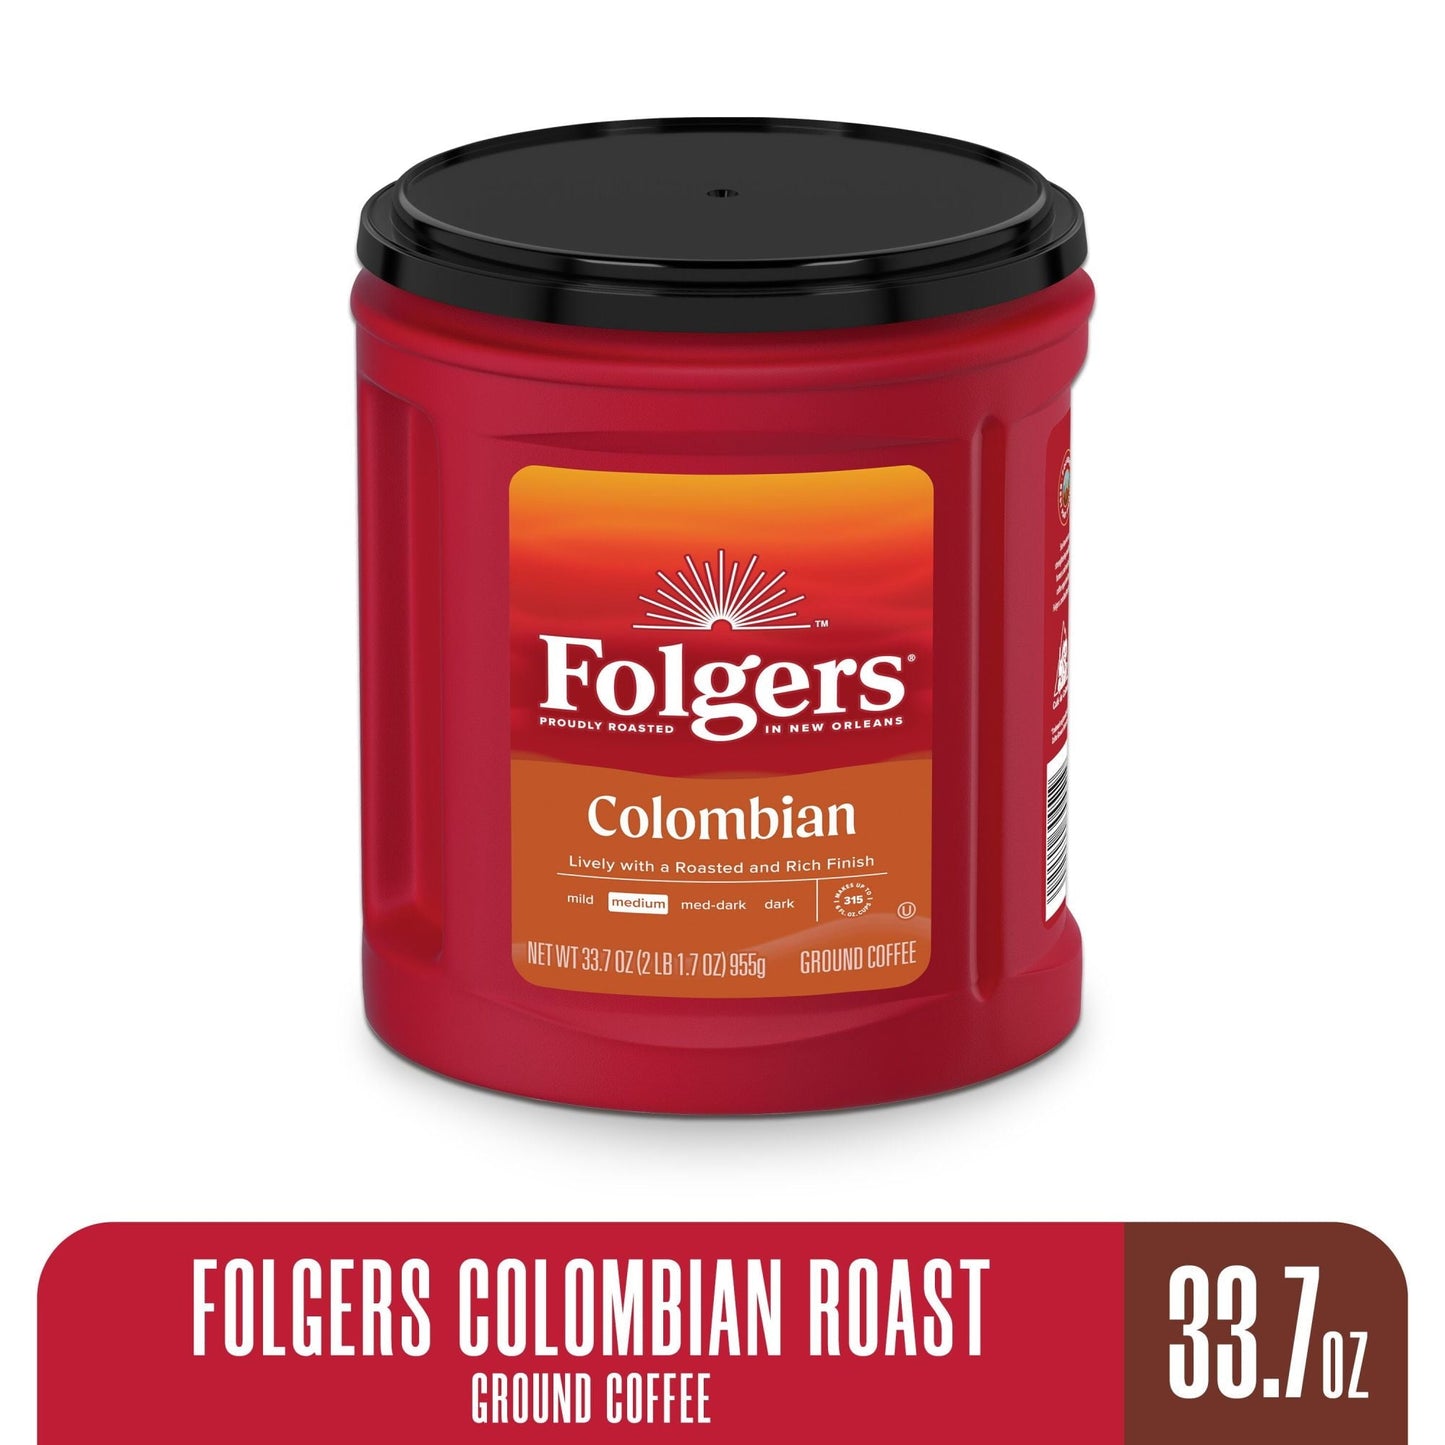 Folgers Colombian Coffee, Medium Roast Ground Coffee, 33.7 Ounce Canister